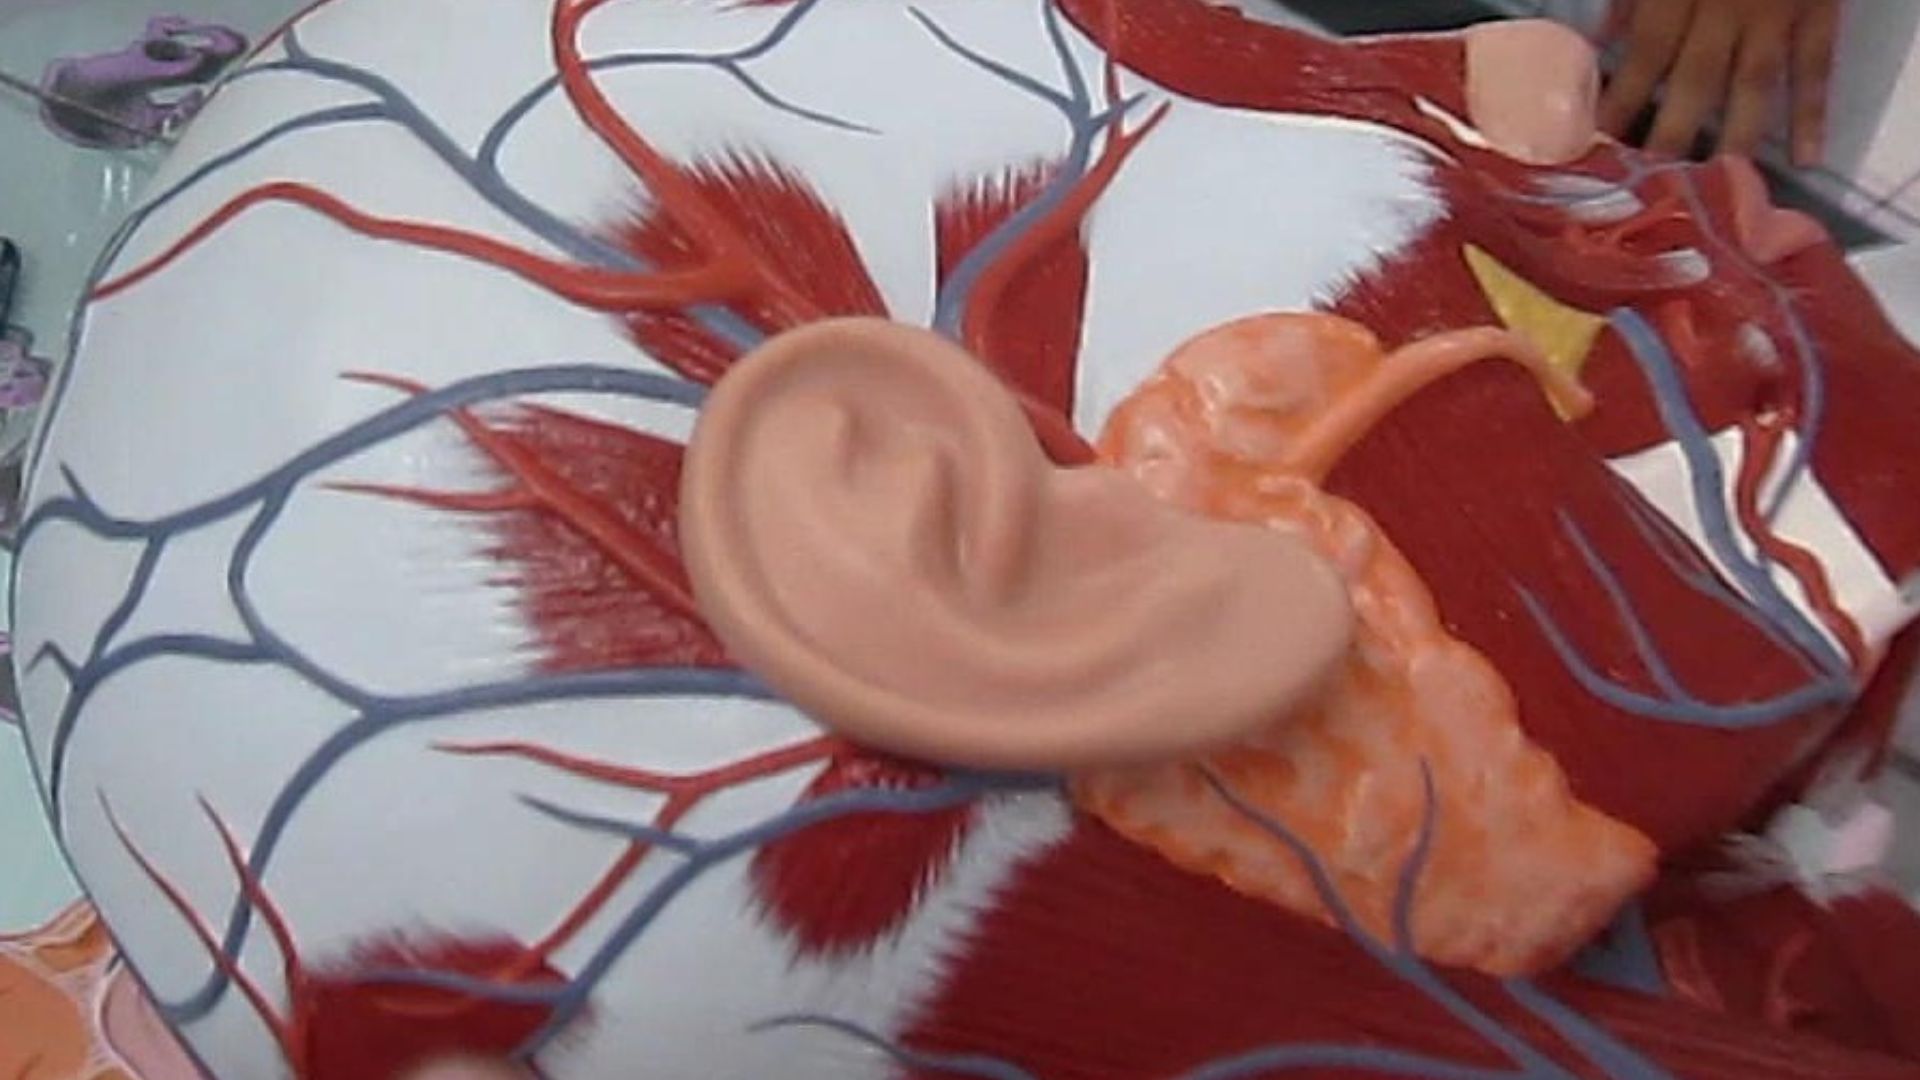 an anatomical model shows the position of the muscles surrounding the outer ear